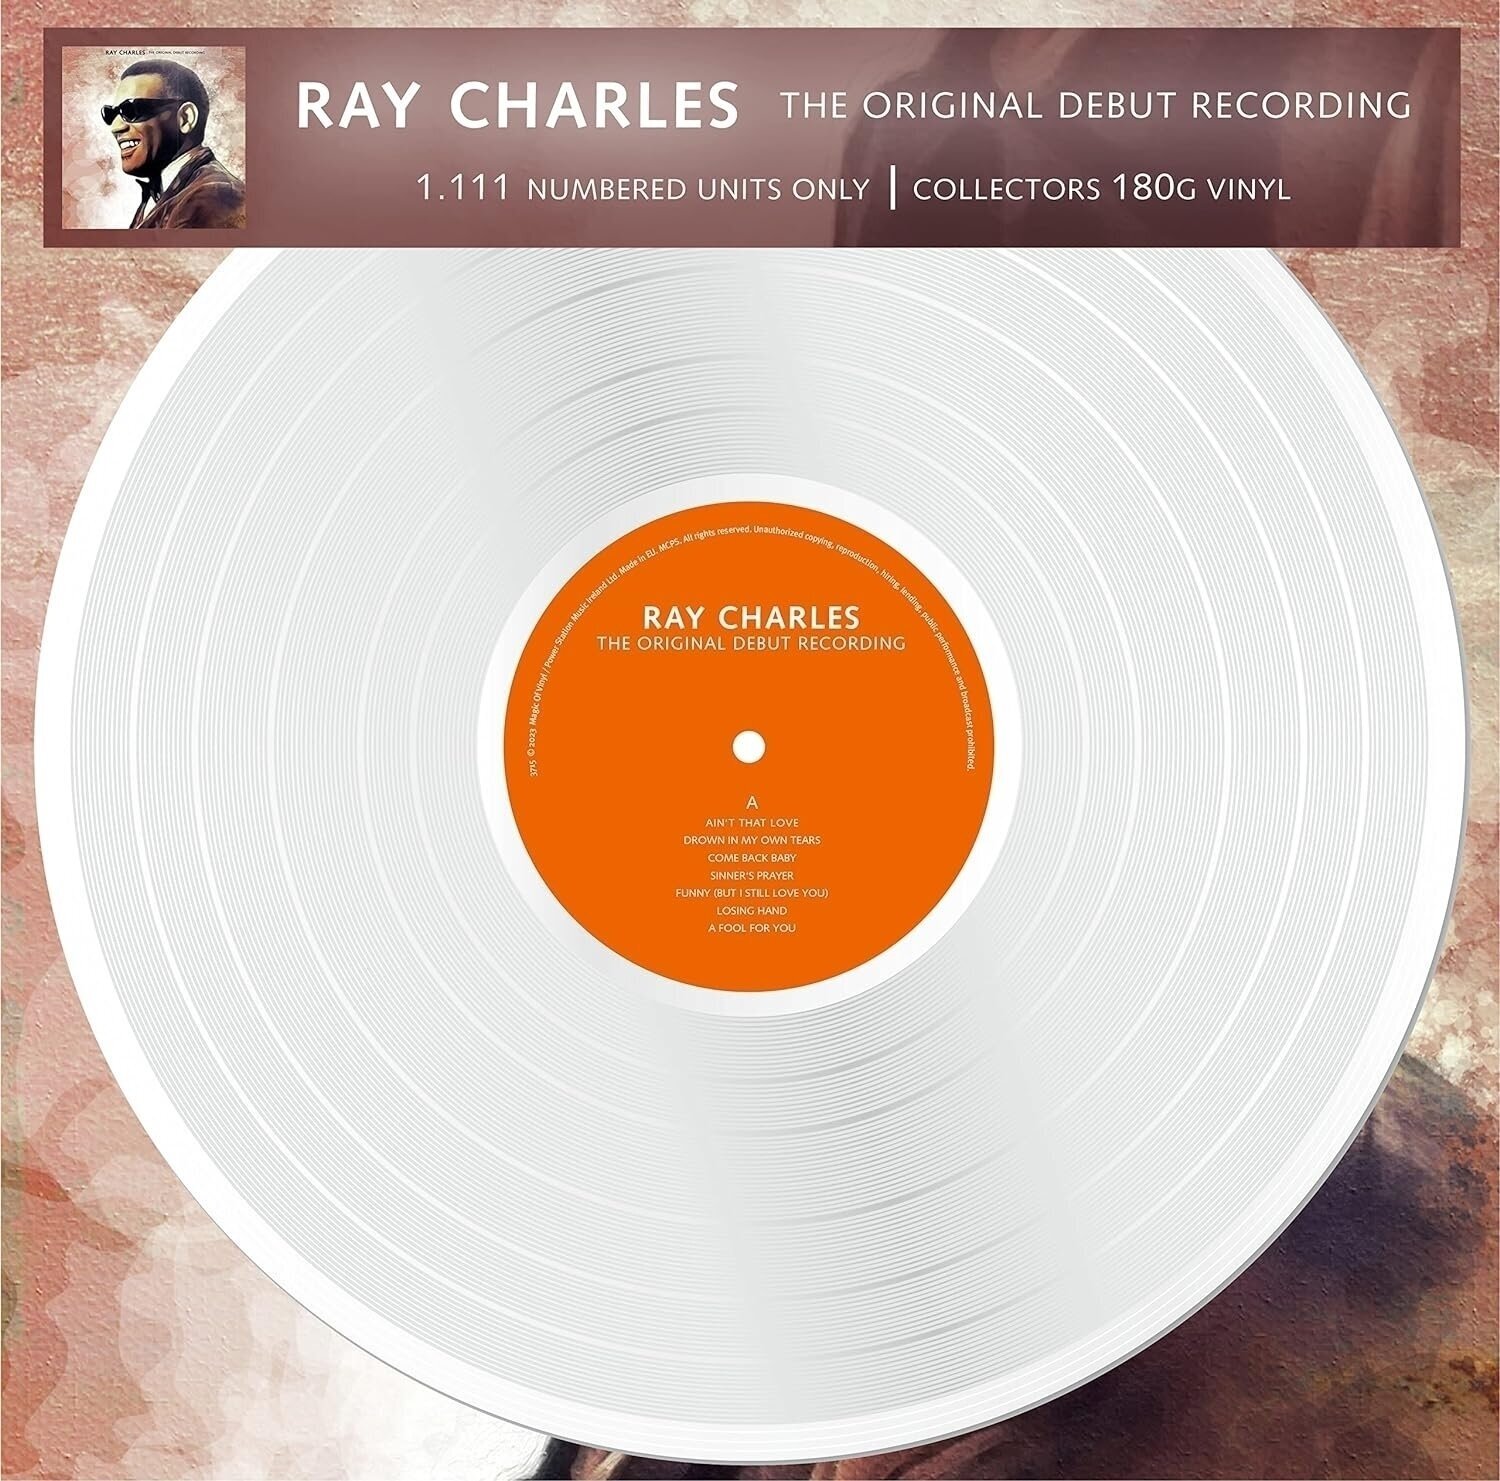 Ray Charles - The Original Debut Recording (Limited Edition) (Numbered) (Reissue) (White Coloured) (LP) Ray Charles